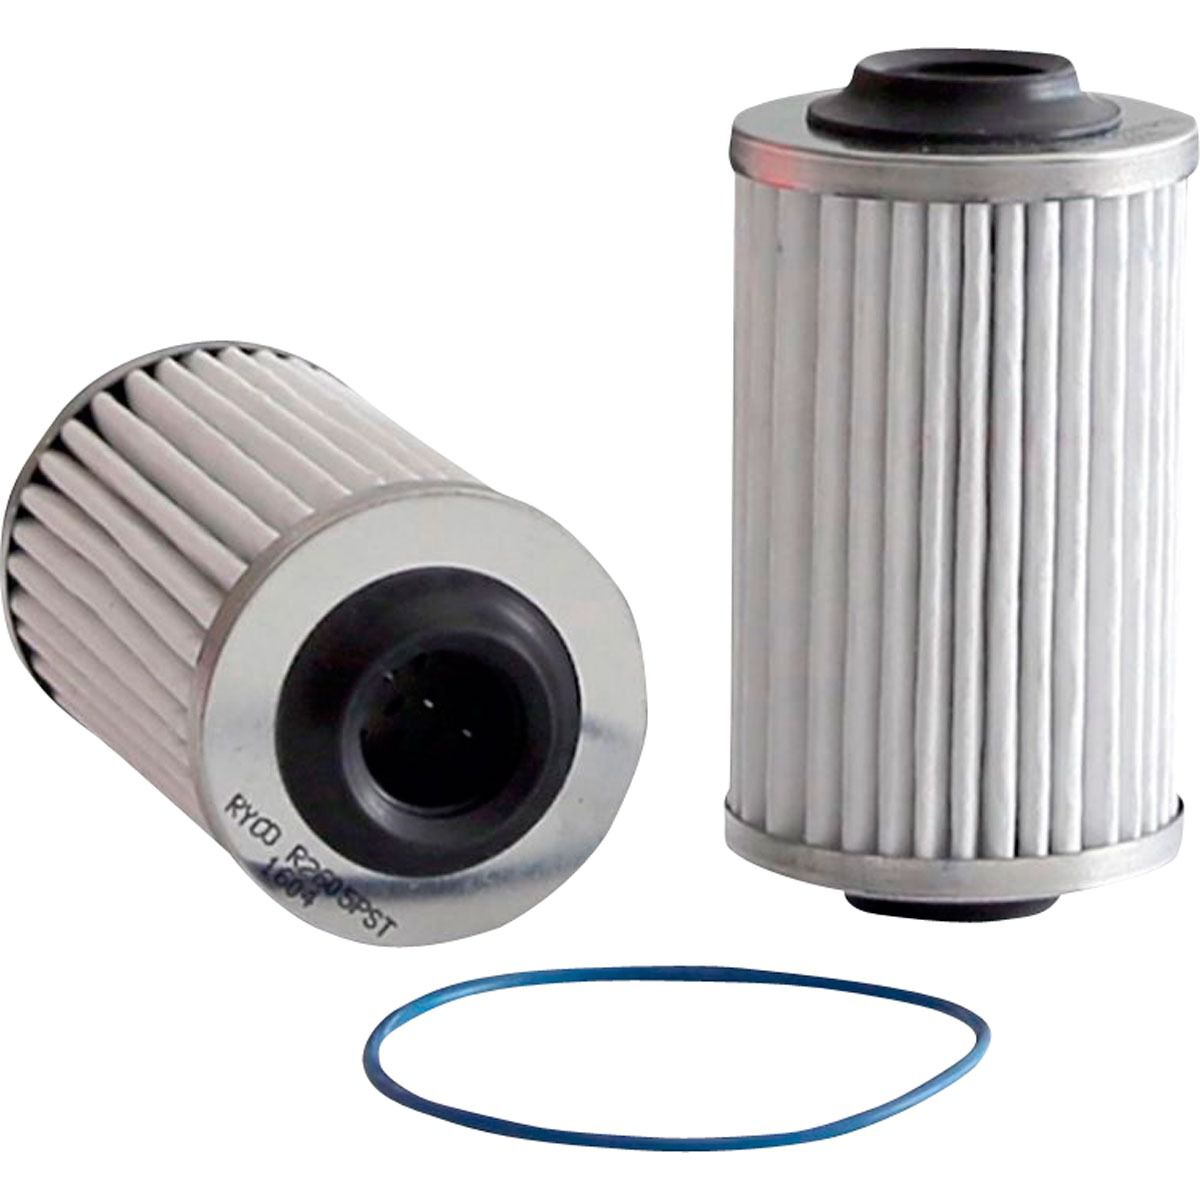 Ryco SynTec Oil Filter - R2605PST (Interchangeable with R2605P), , scaau_hi-res